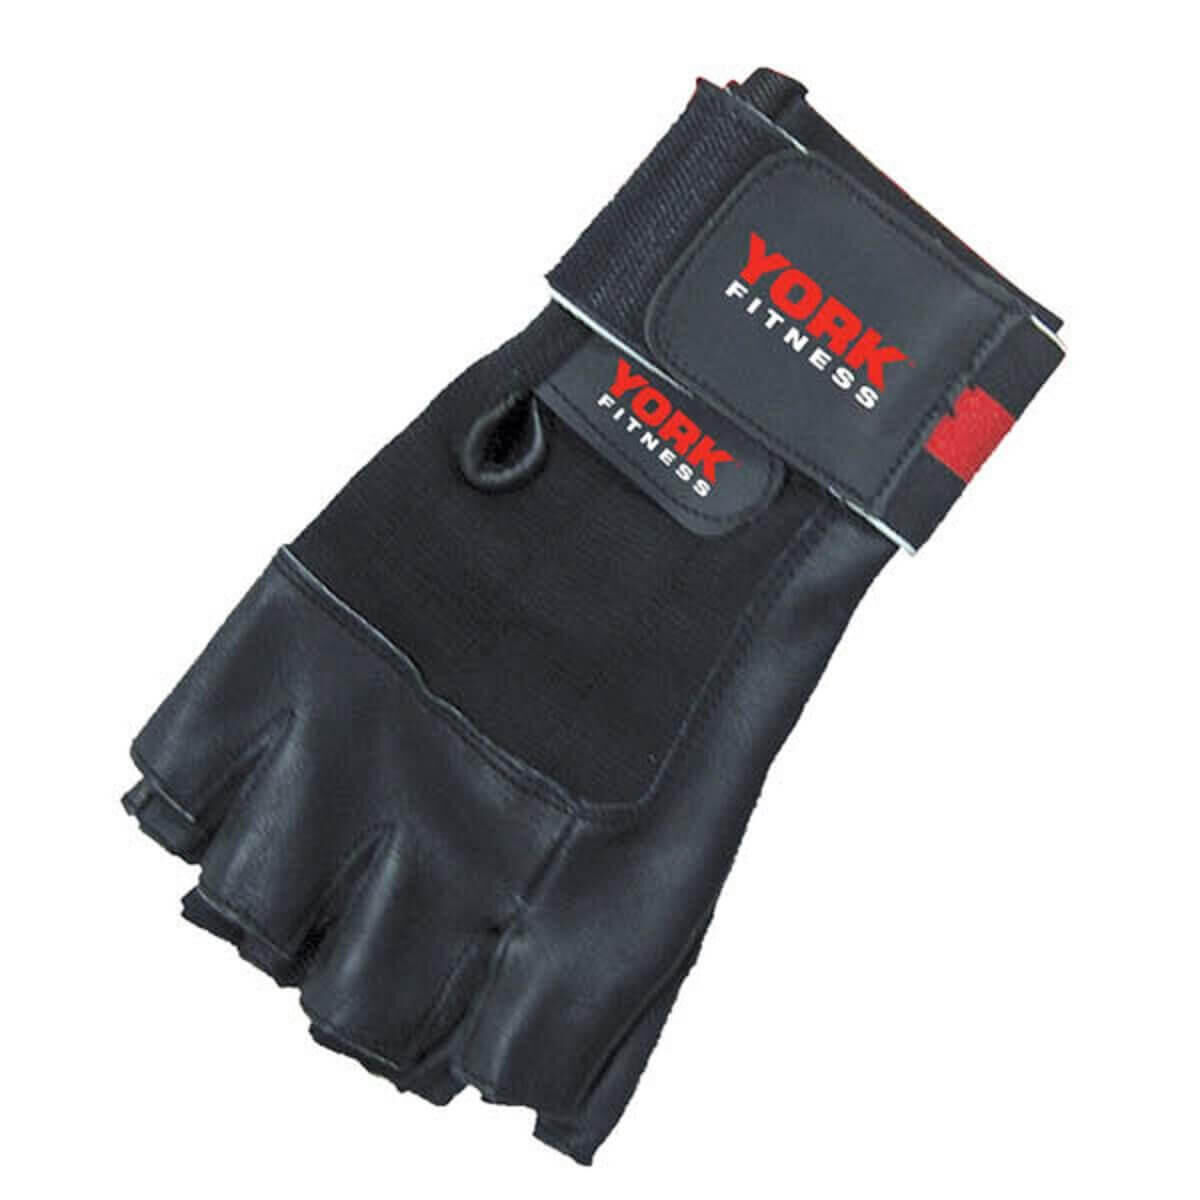 YORK FITNESS York Fitness Leather Weight Lifting Gloves with Wrist Wrap